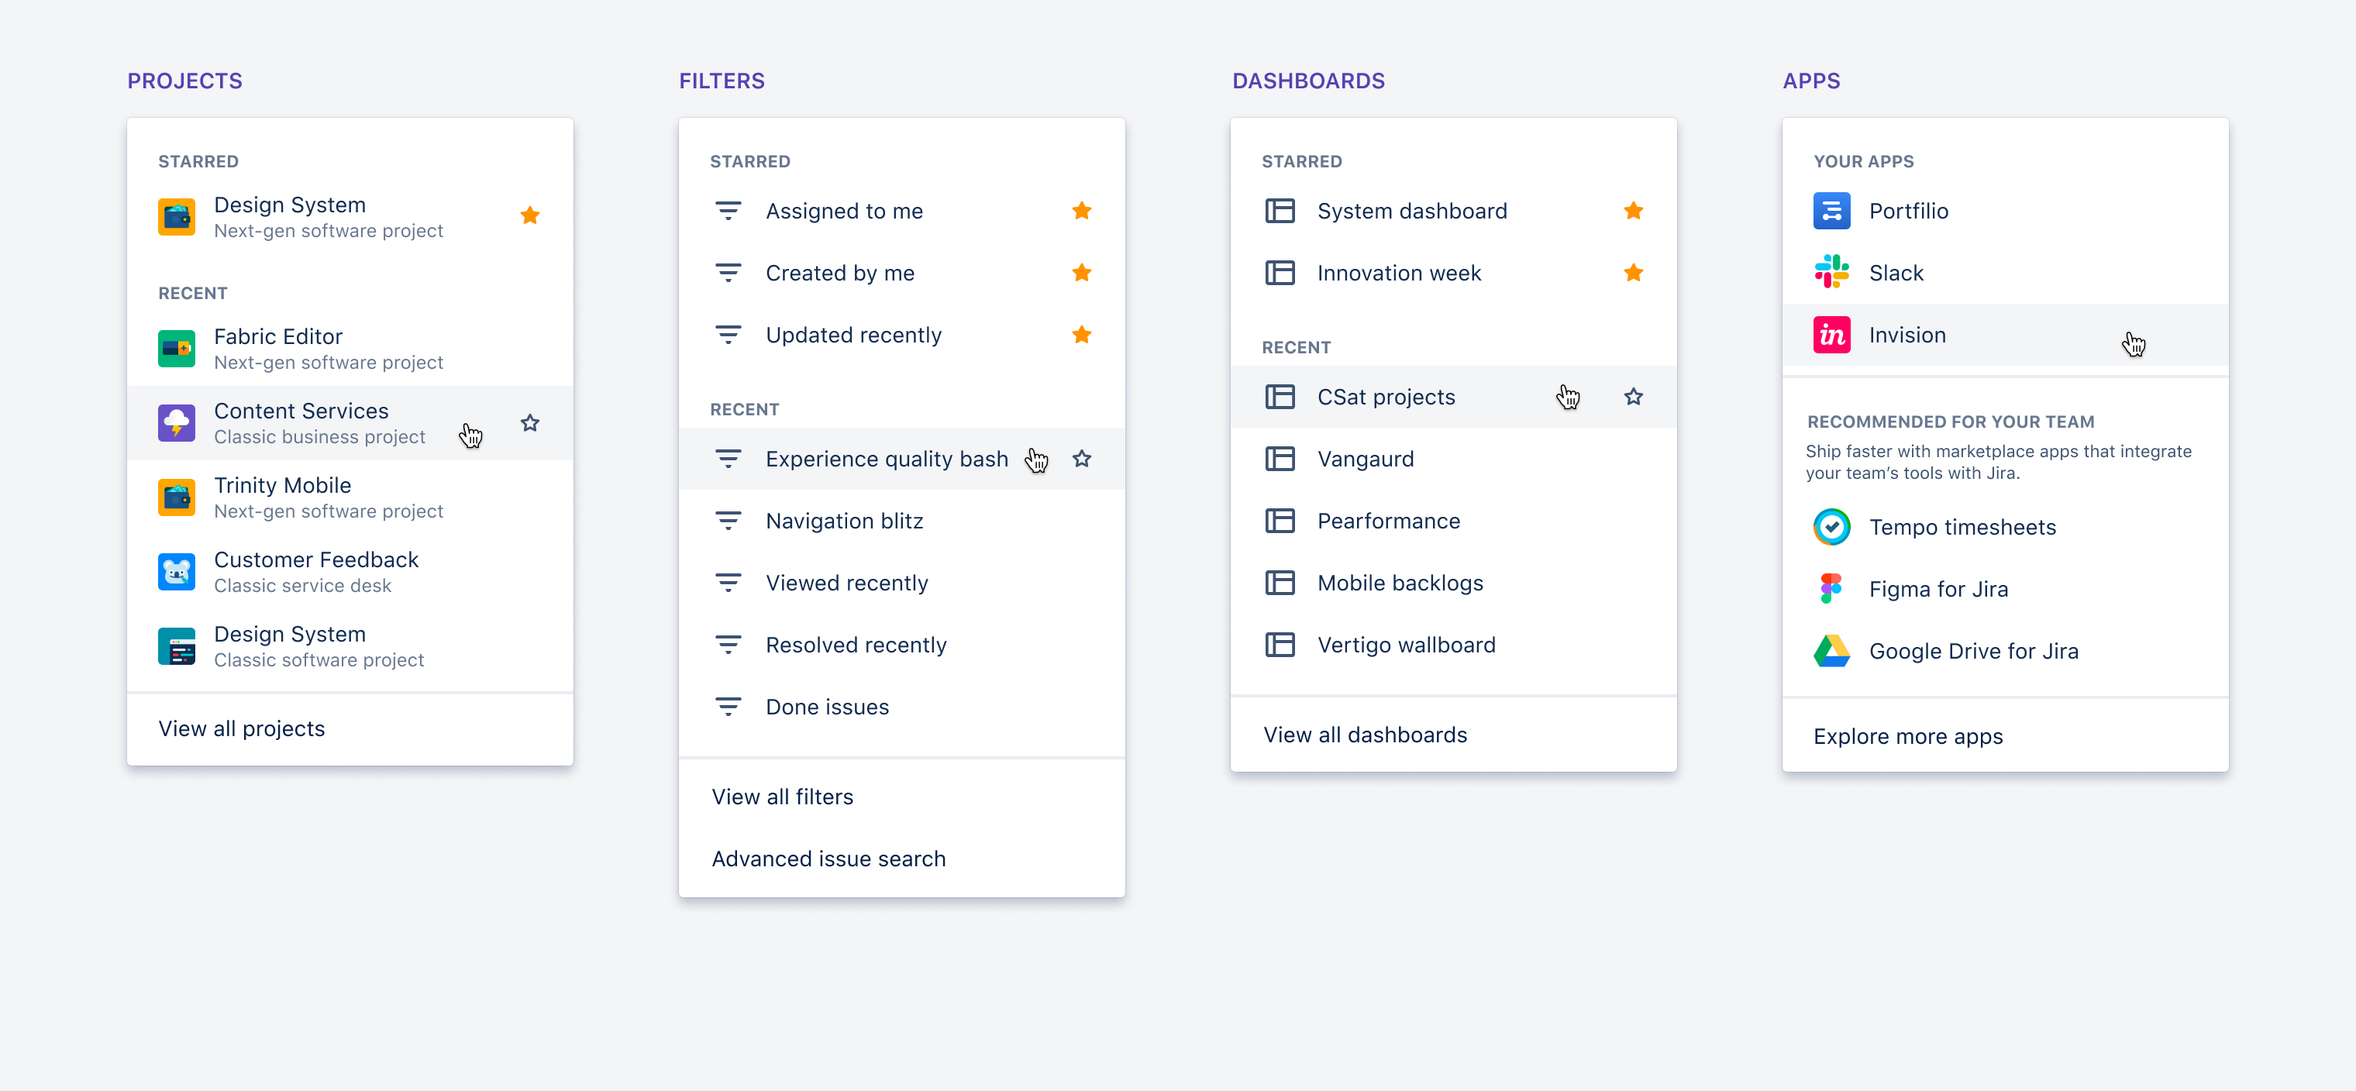 The navigation menus in Jira (projects, filters, dashboards, and apps)